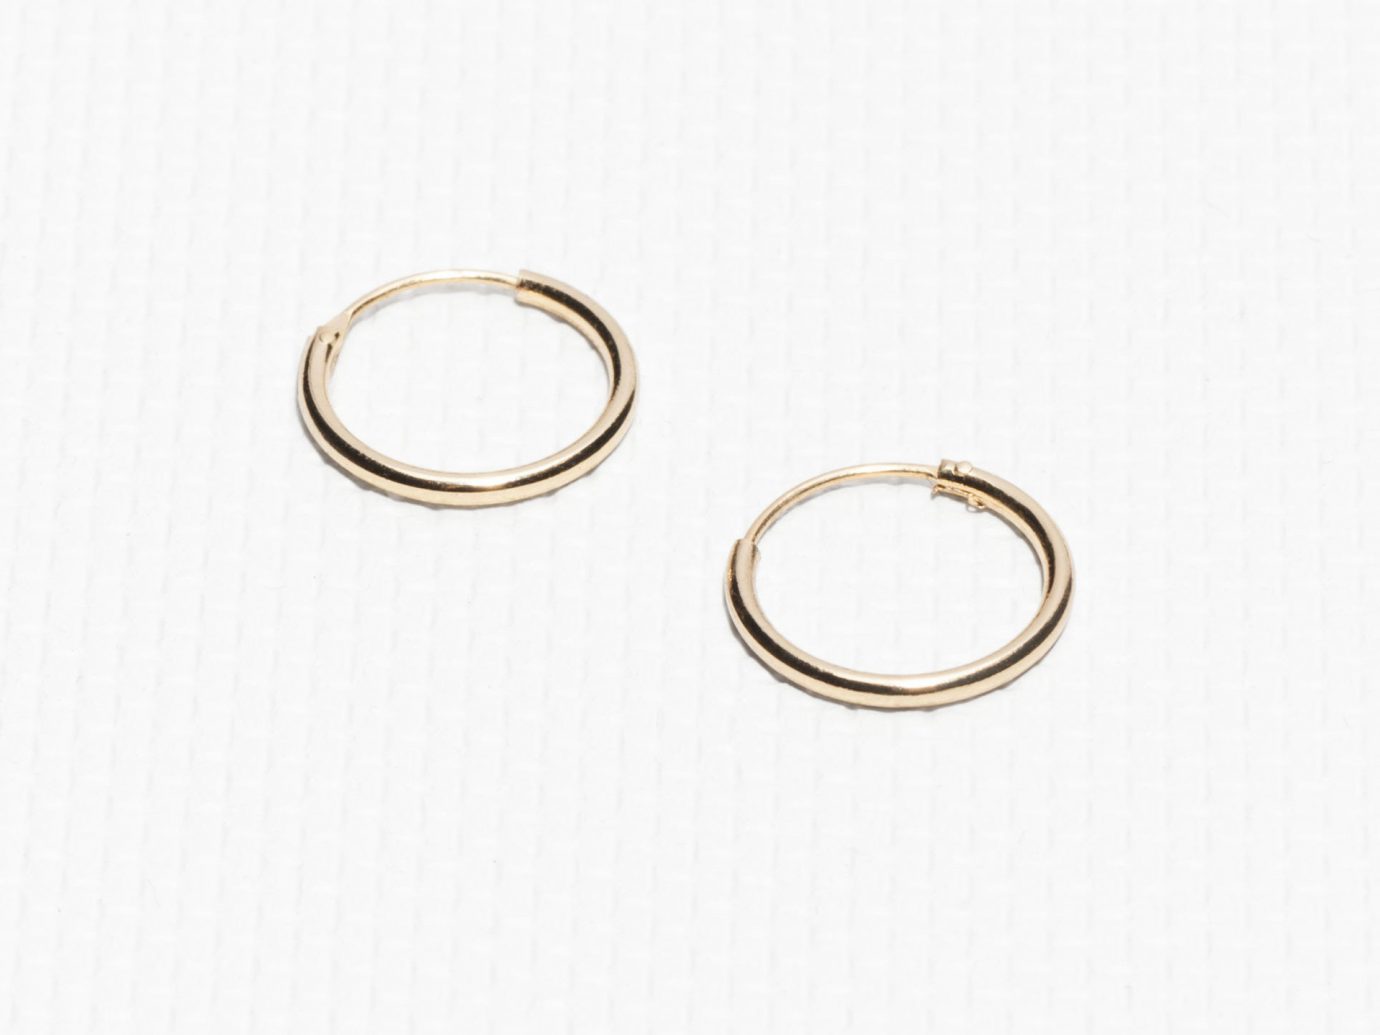 Spring Travel Style + Design Summer Travel Travel Lifestyle Travel Shop earrings jewellery fashion accessory body jewelry metal silver product design jewelry making ring rings product circle platinum